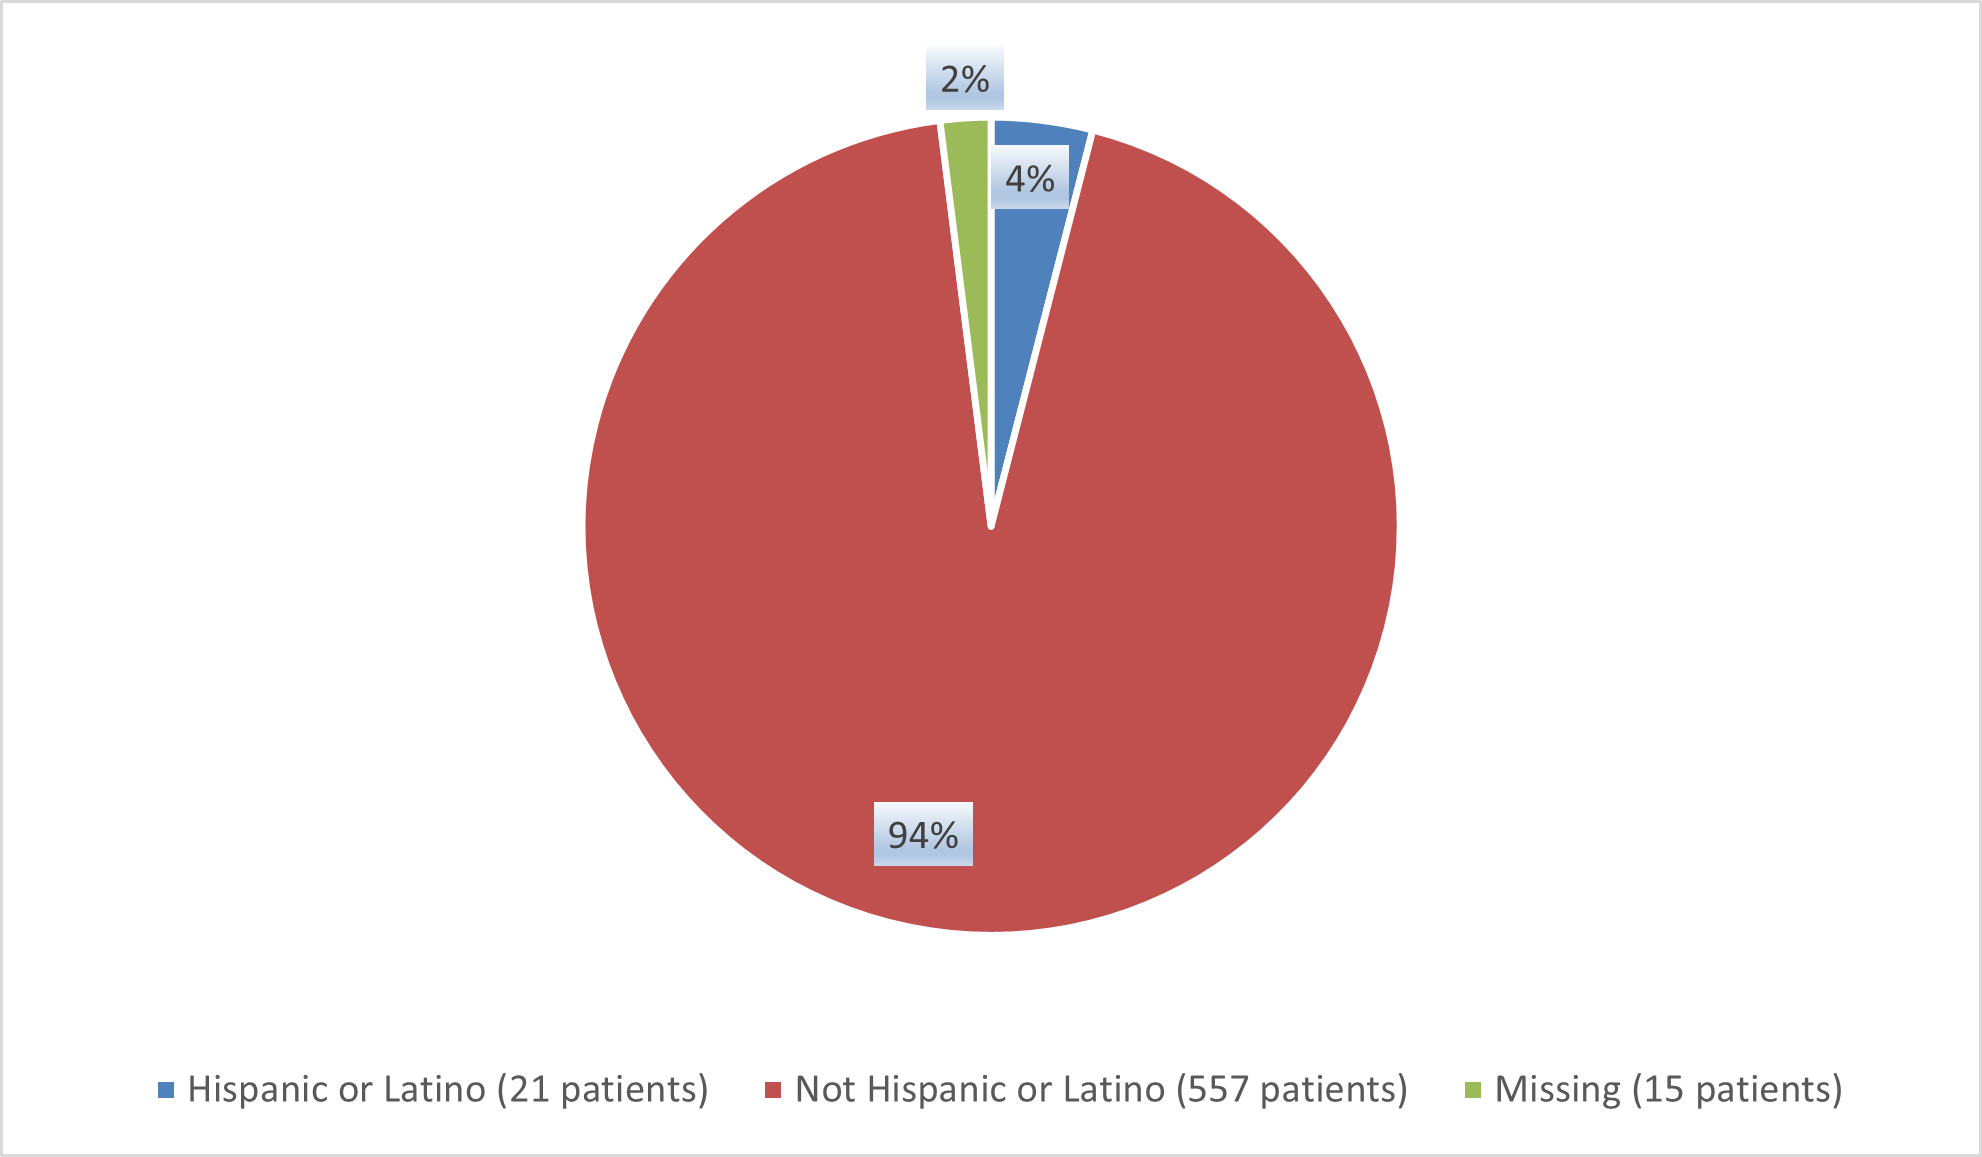 Pie chart summarizing how many Hispanics and non-Hispanics  were in the clinical trial.  In total, 21 (4%) Hispanic patients,  and 557 (94%) non-Hispanic patients, and 15 (2%) Missing patients participated in the clinical trial.